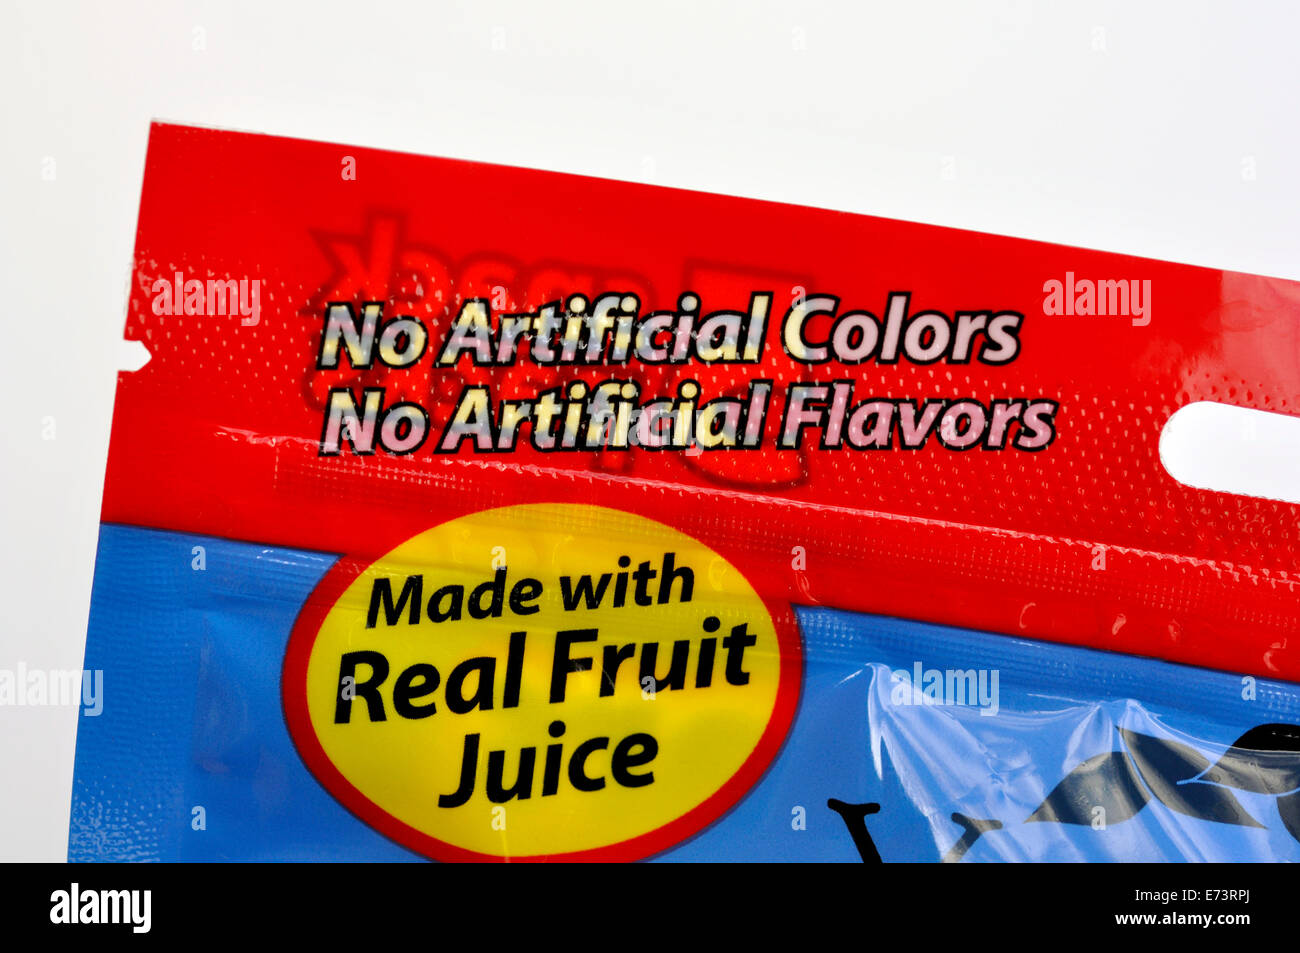 Candy made with no artificial colors and flavors Stock Photo